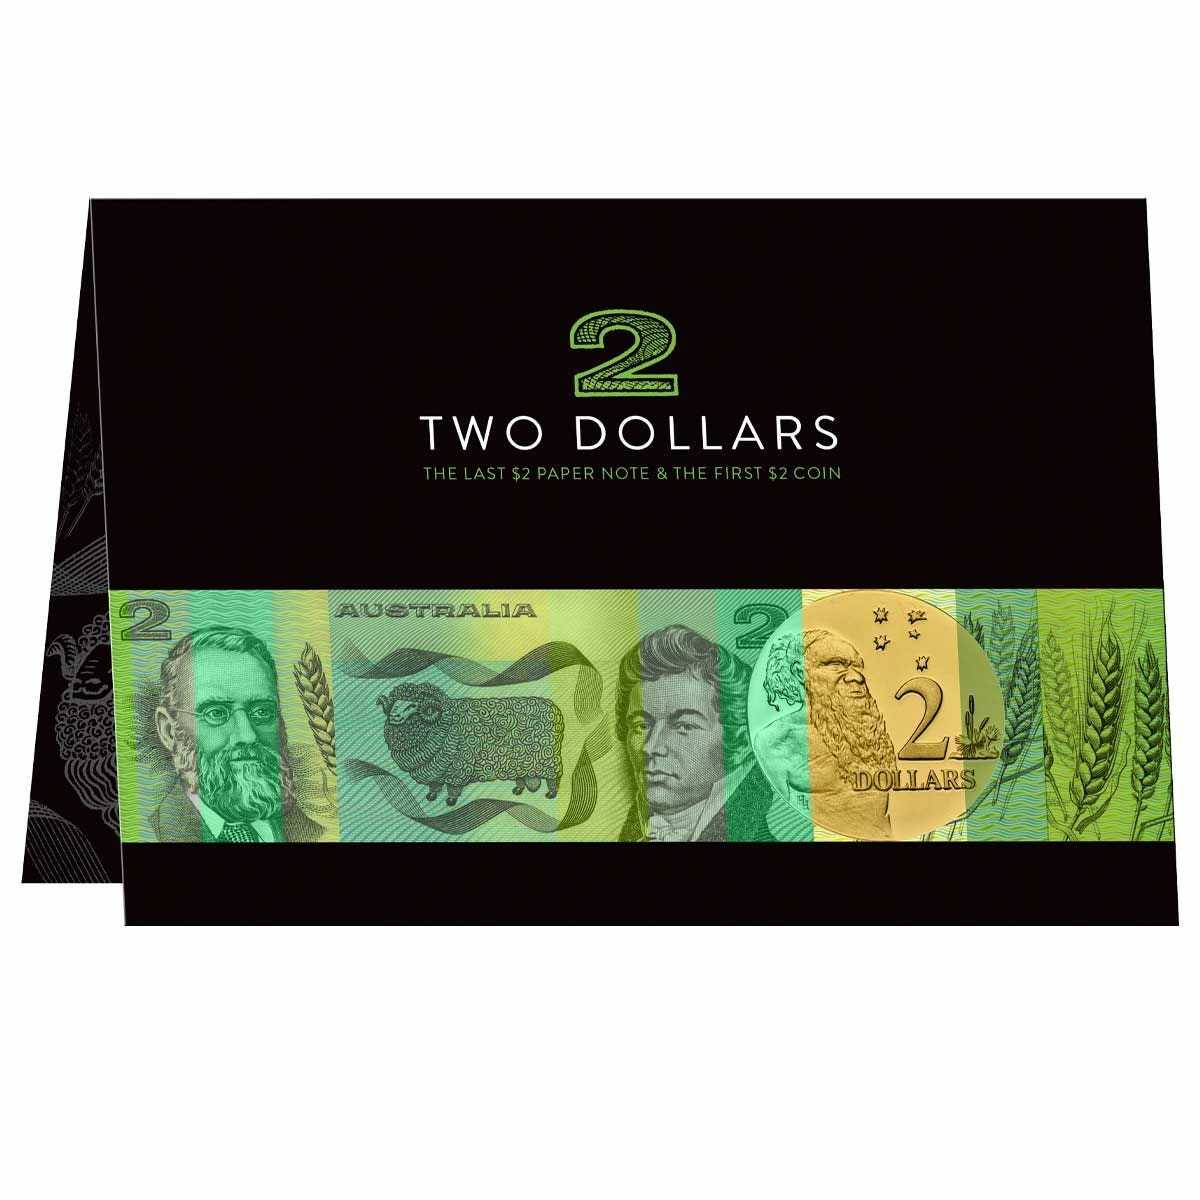 $2 Last Note & First Coin Pack Uncirculated